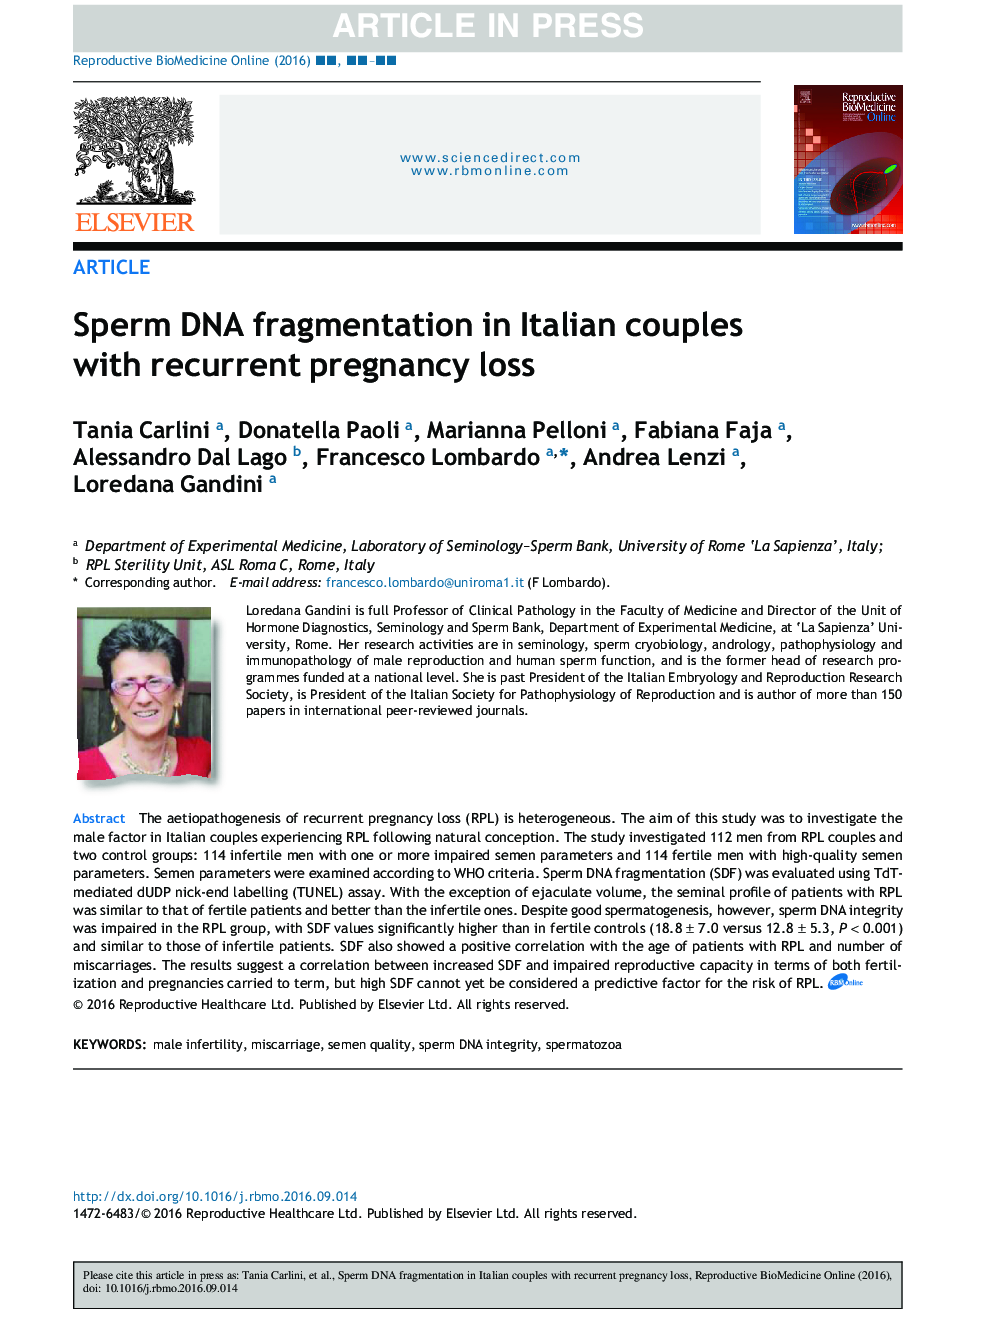 Sperm DNA fragmentation in Italian couples with recurrent pregnancy loss